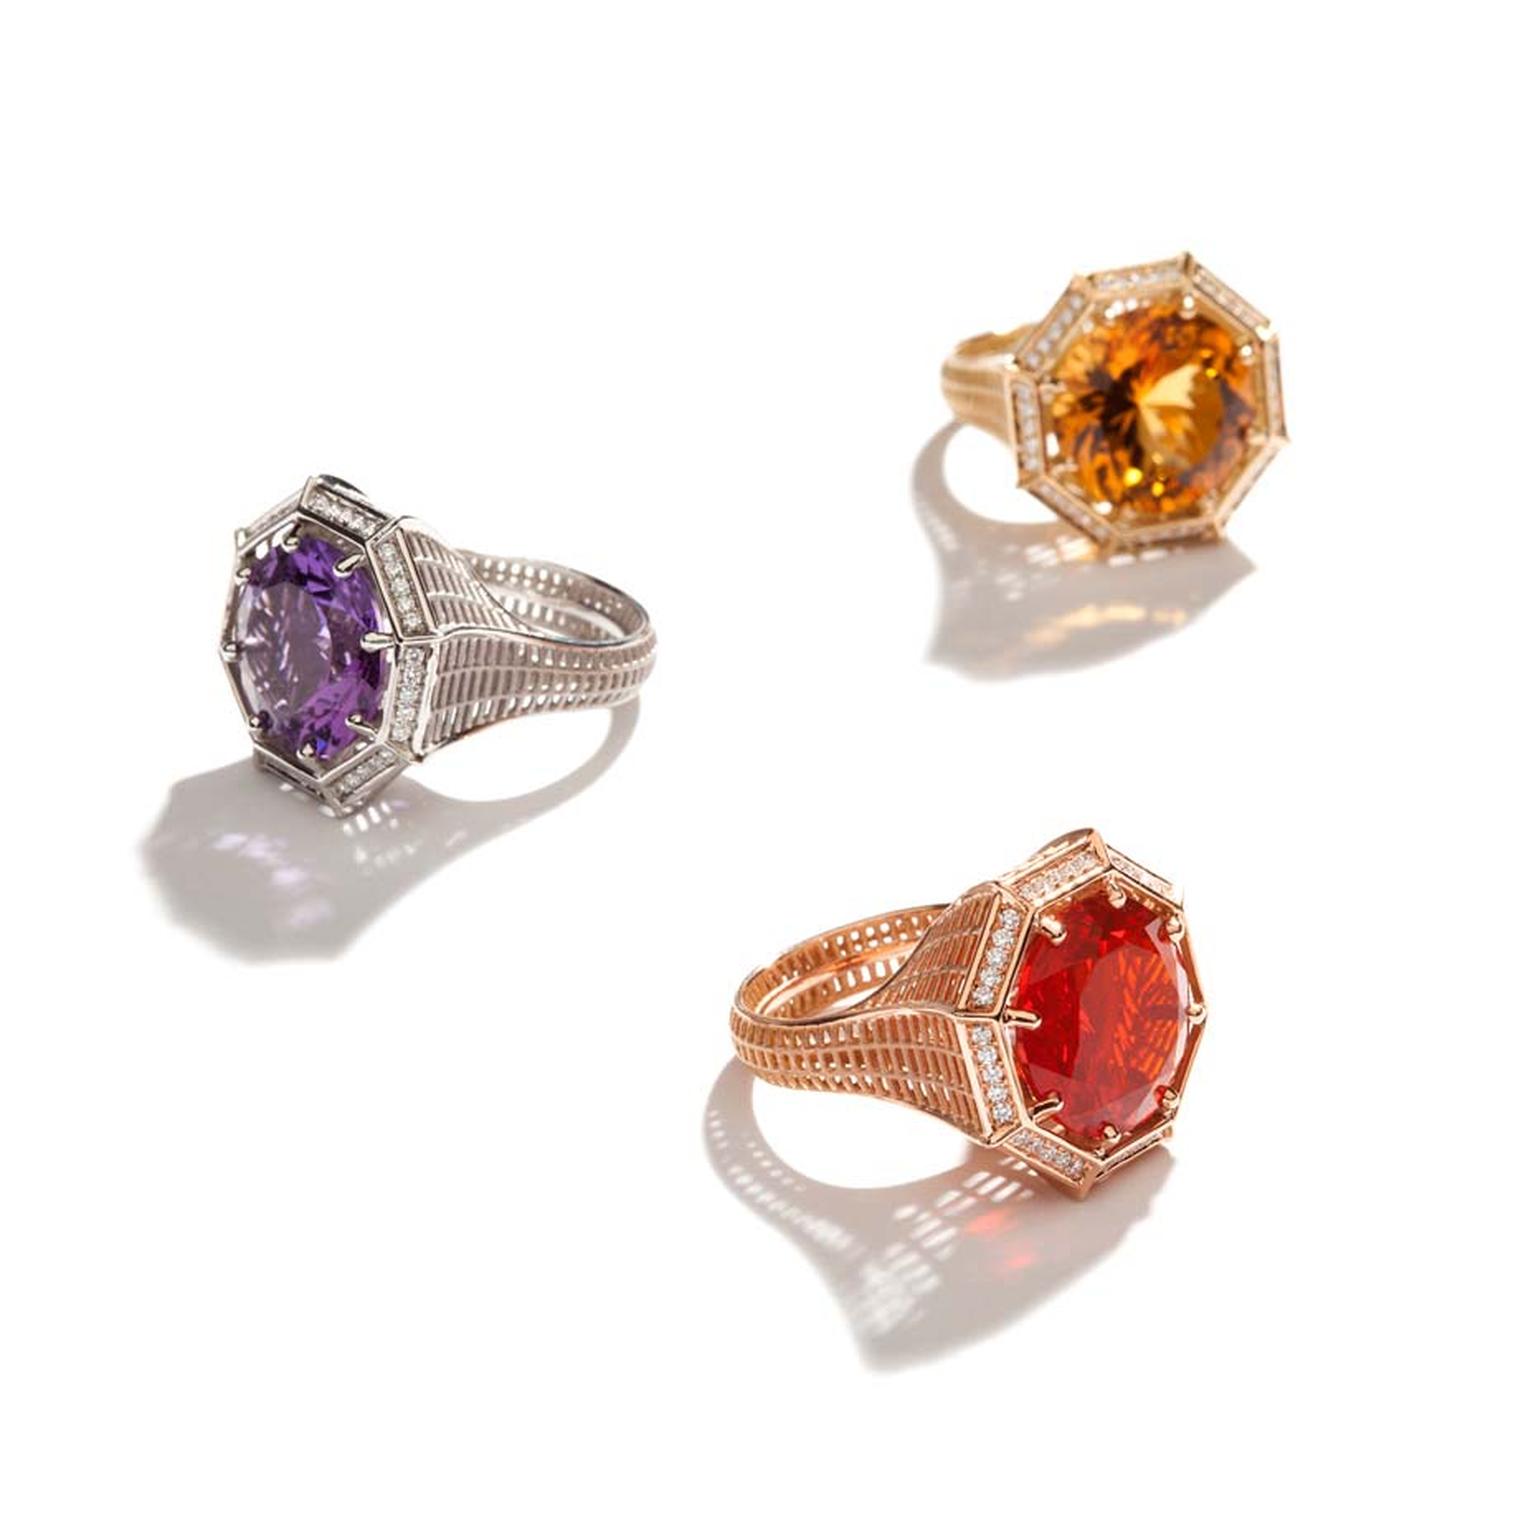 Roule & Co Octagon cocktail rings in platinum with amethyst and white diamonds, left; yellow gold with citrine and white diamonds, top; rose gold, ?re opal and white diamonds, below.